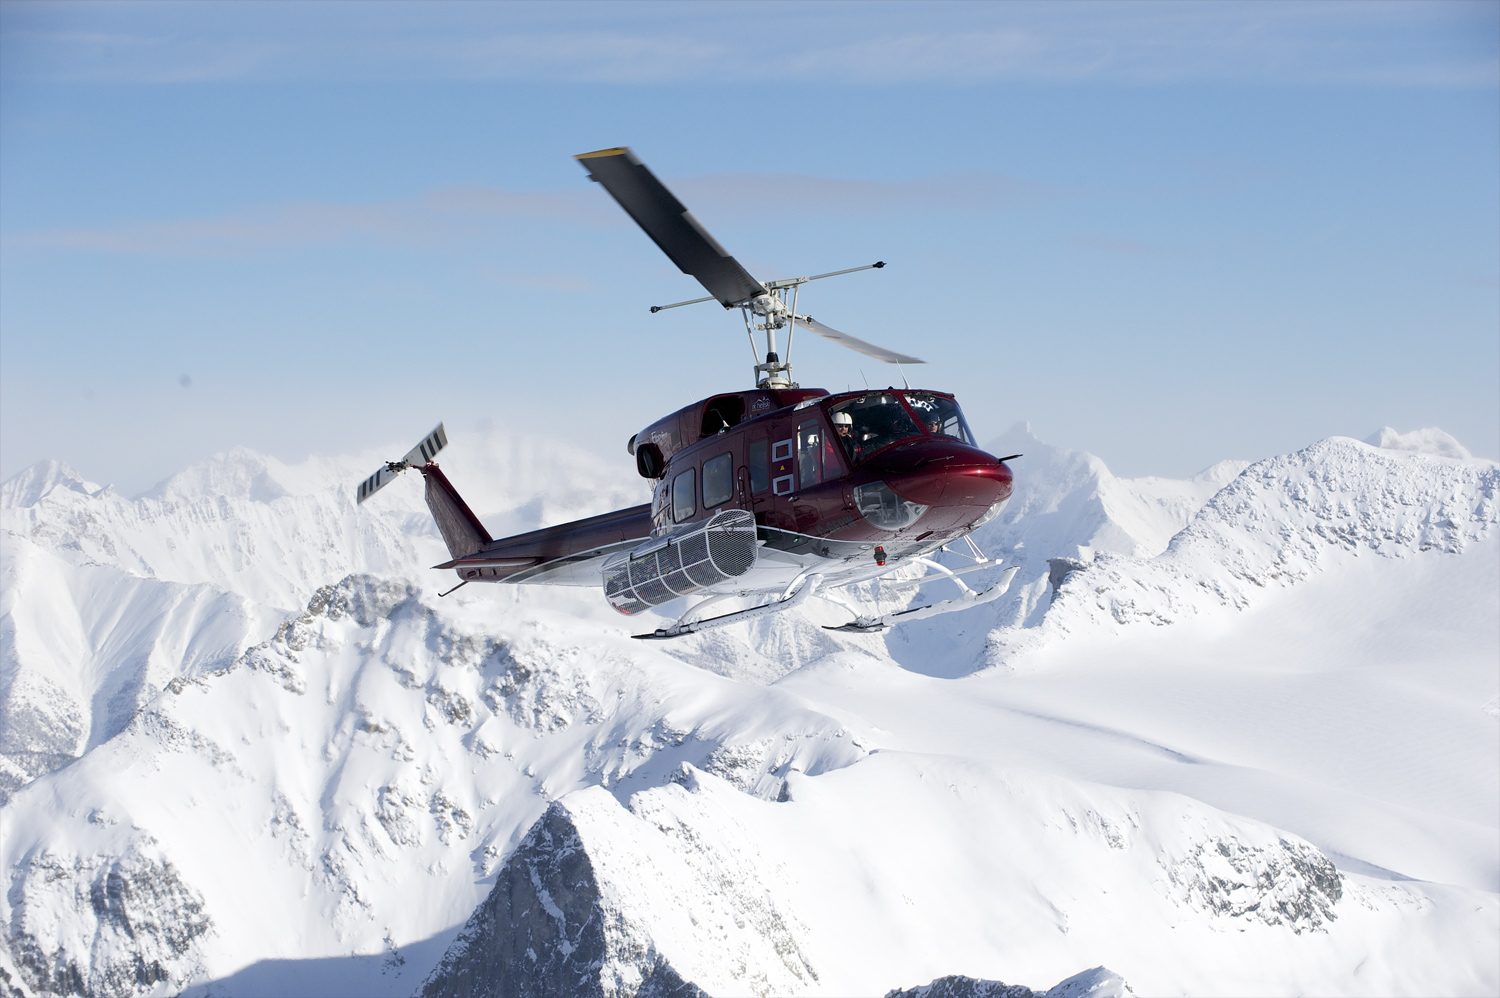 An Incredible Day In The Life Of A First-time Heli-boarder